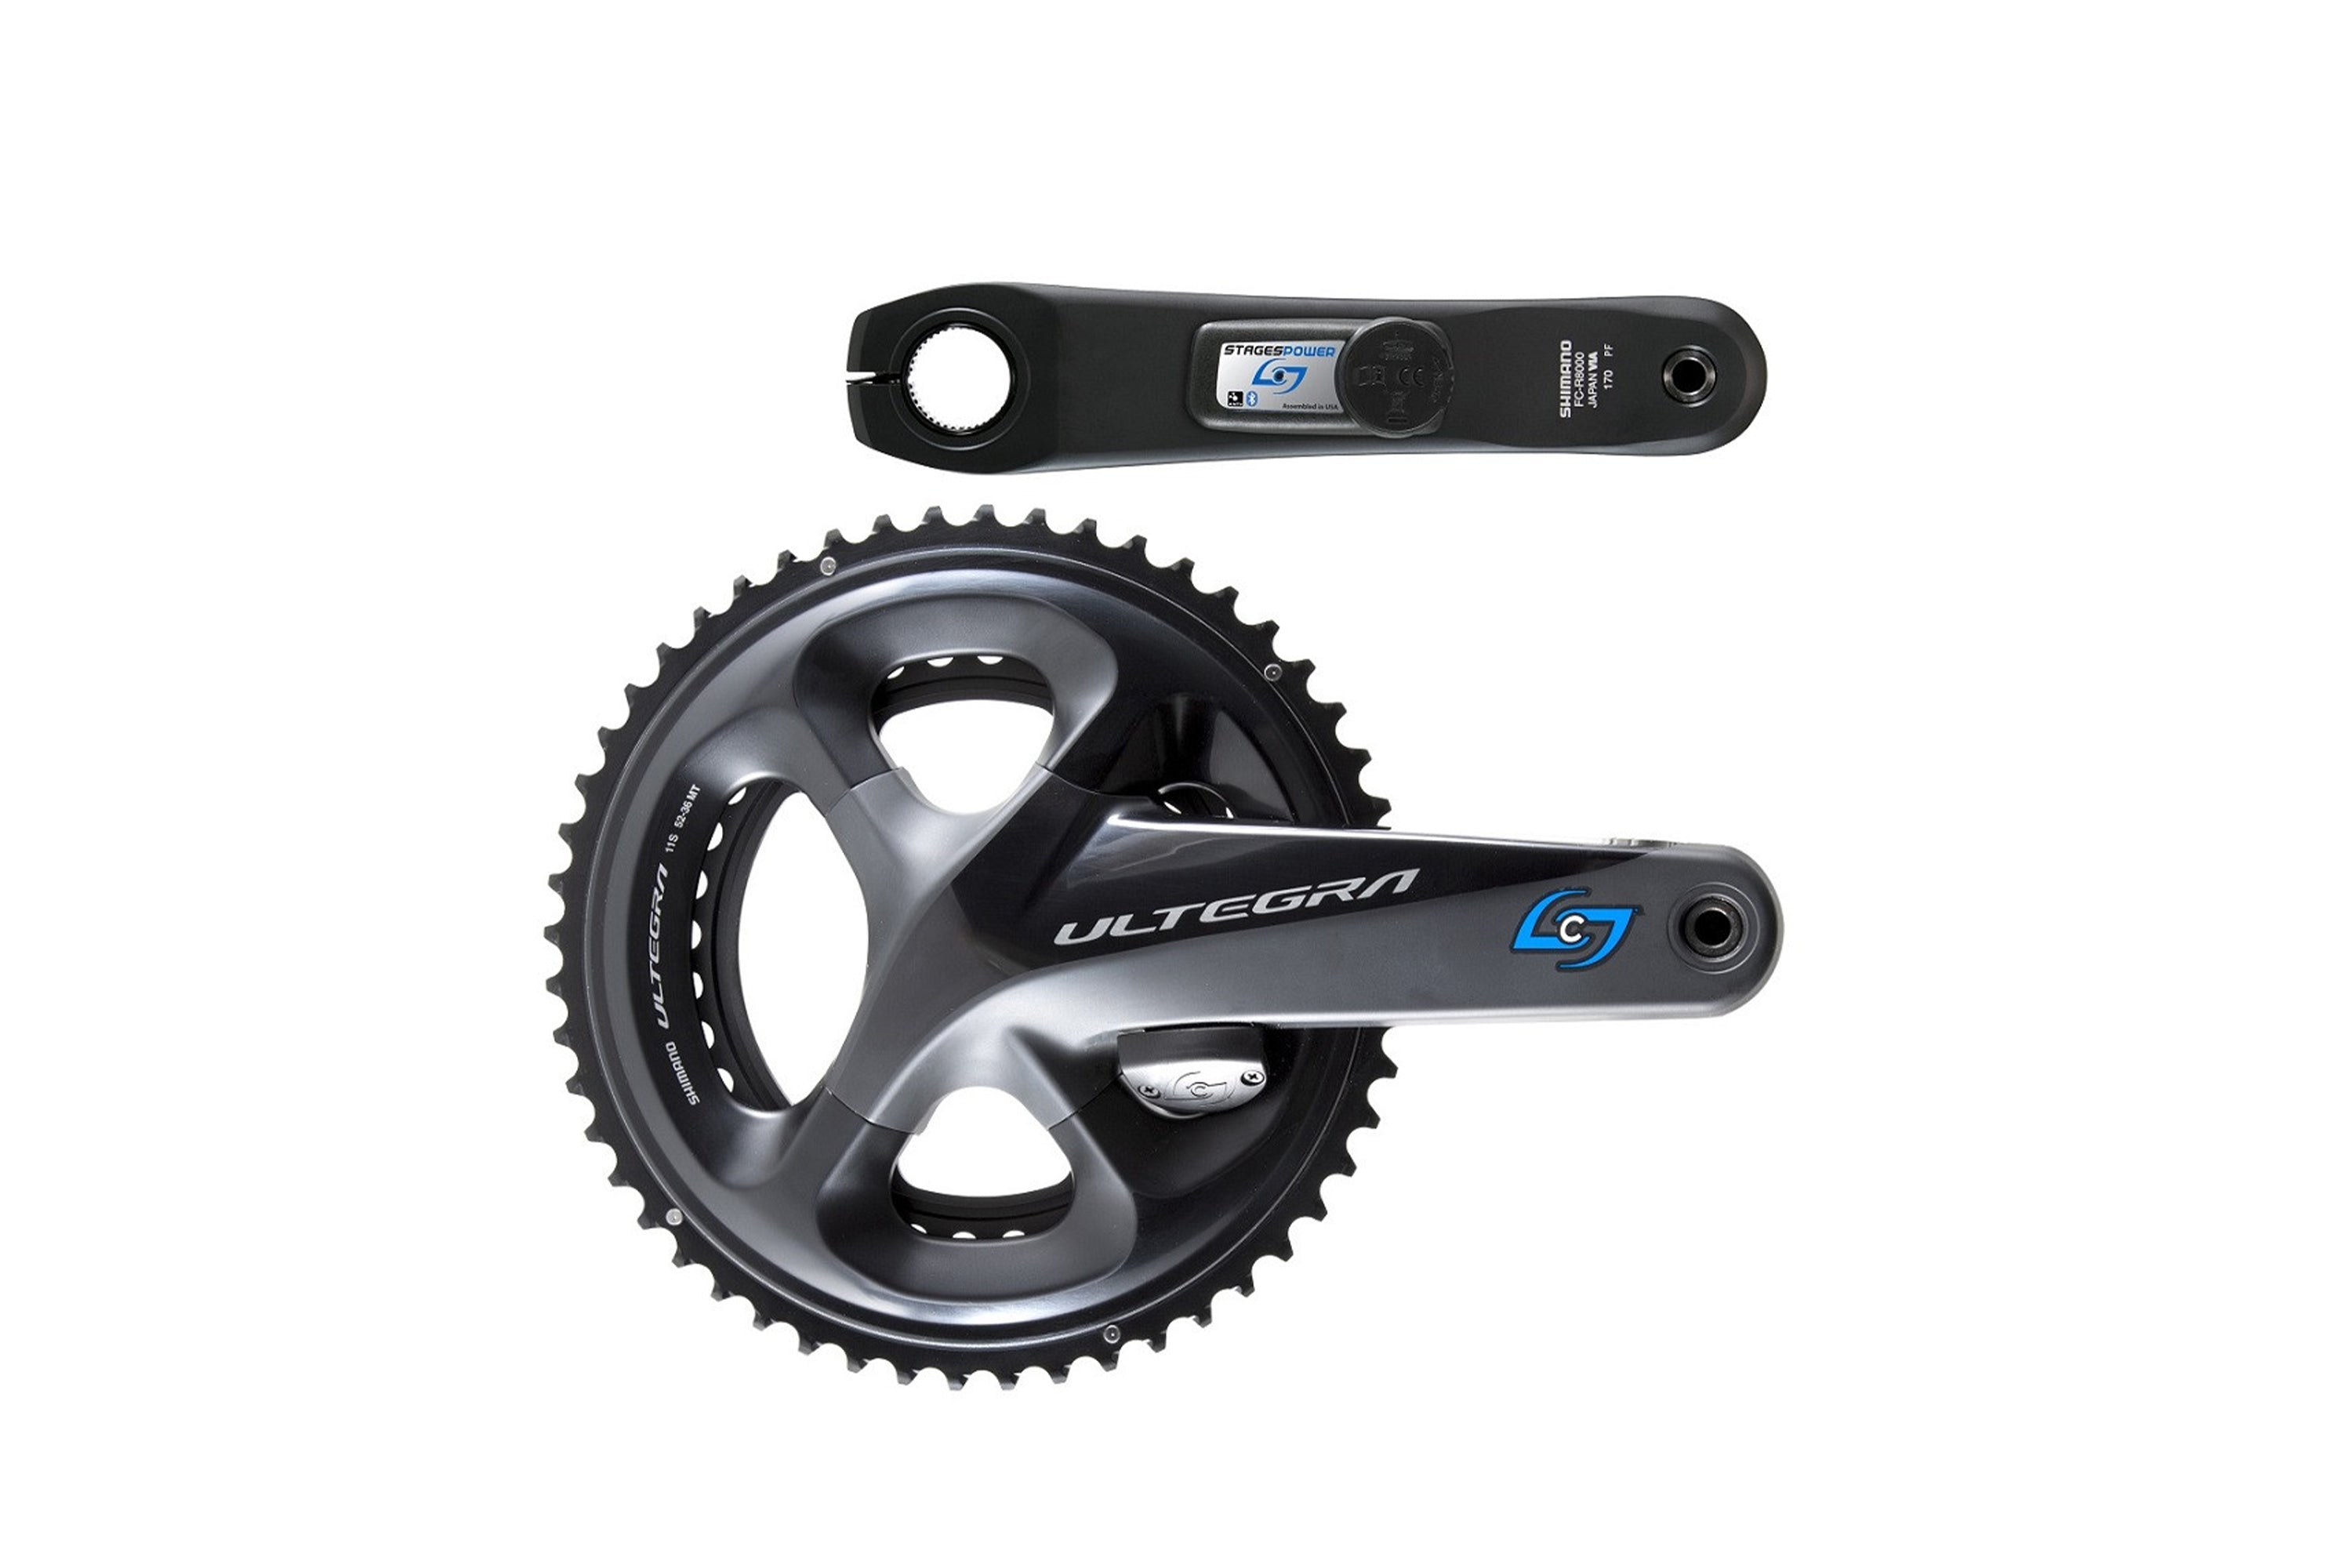 Stages Power Meter Ultegra R8000 Crankset 172.5mm 50/34 – Incycle